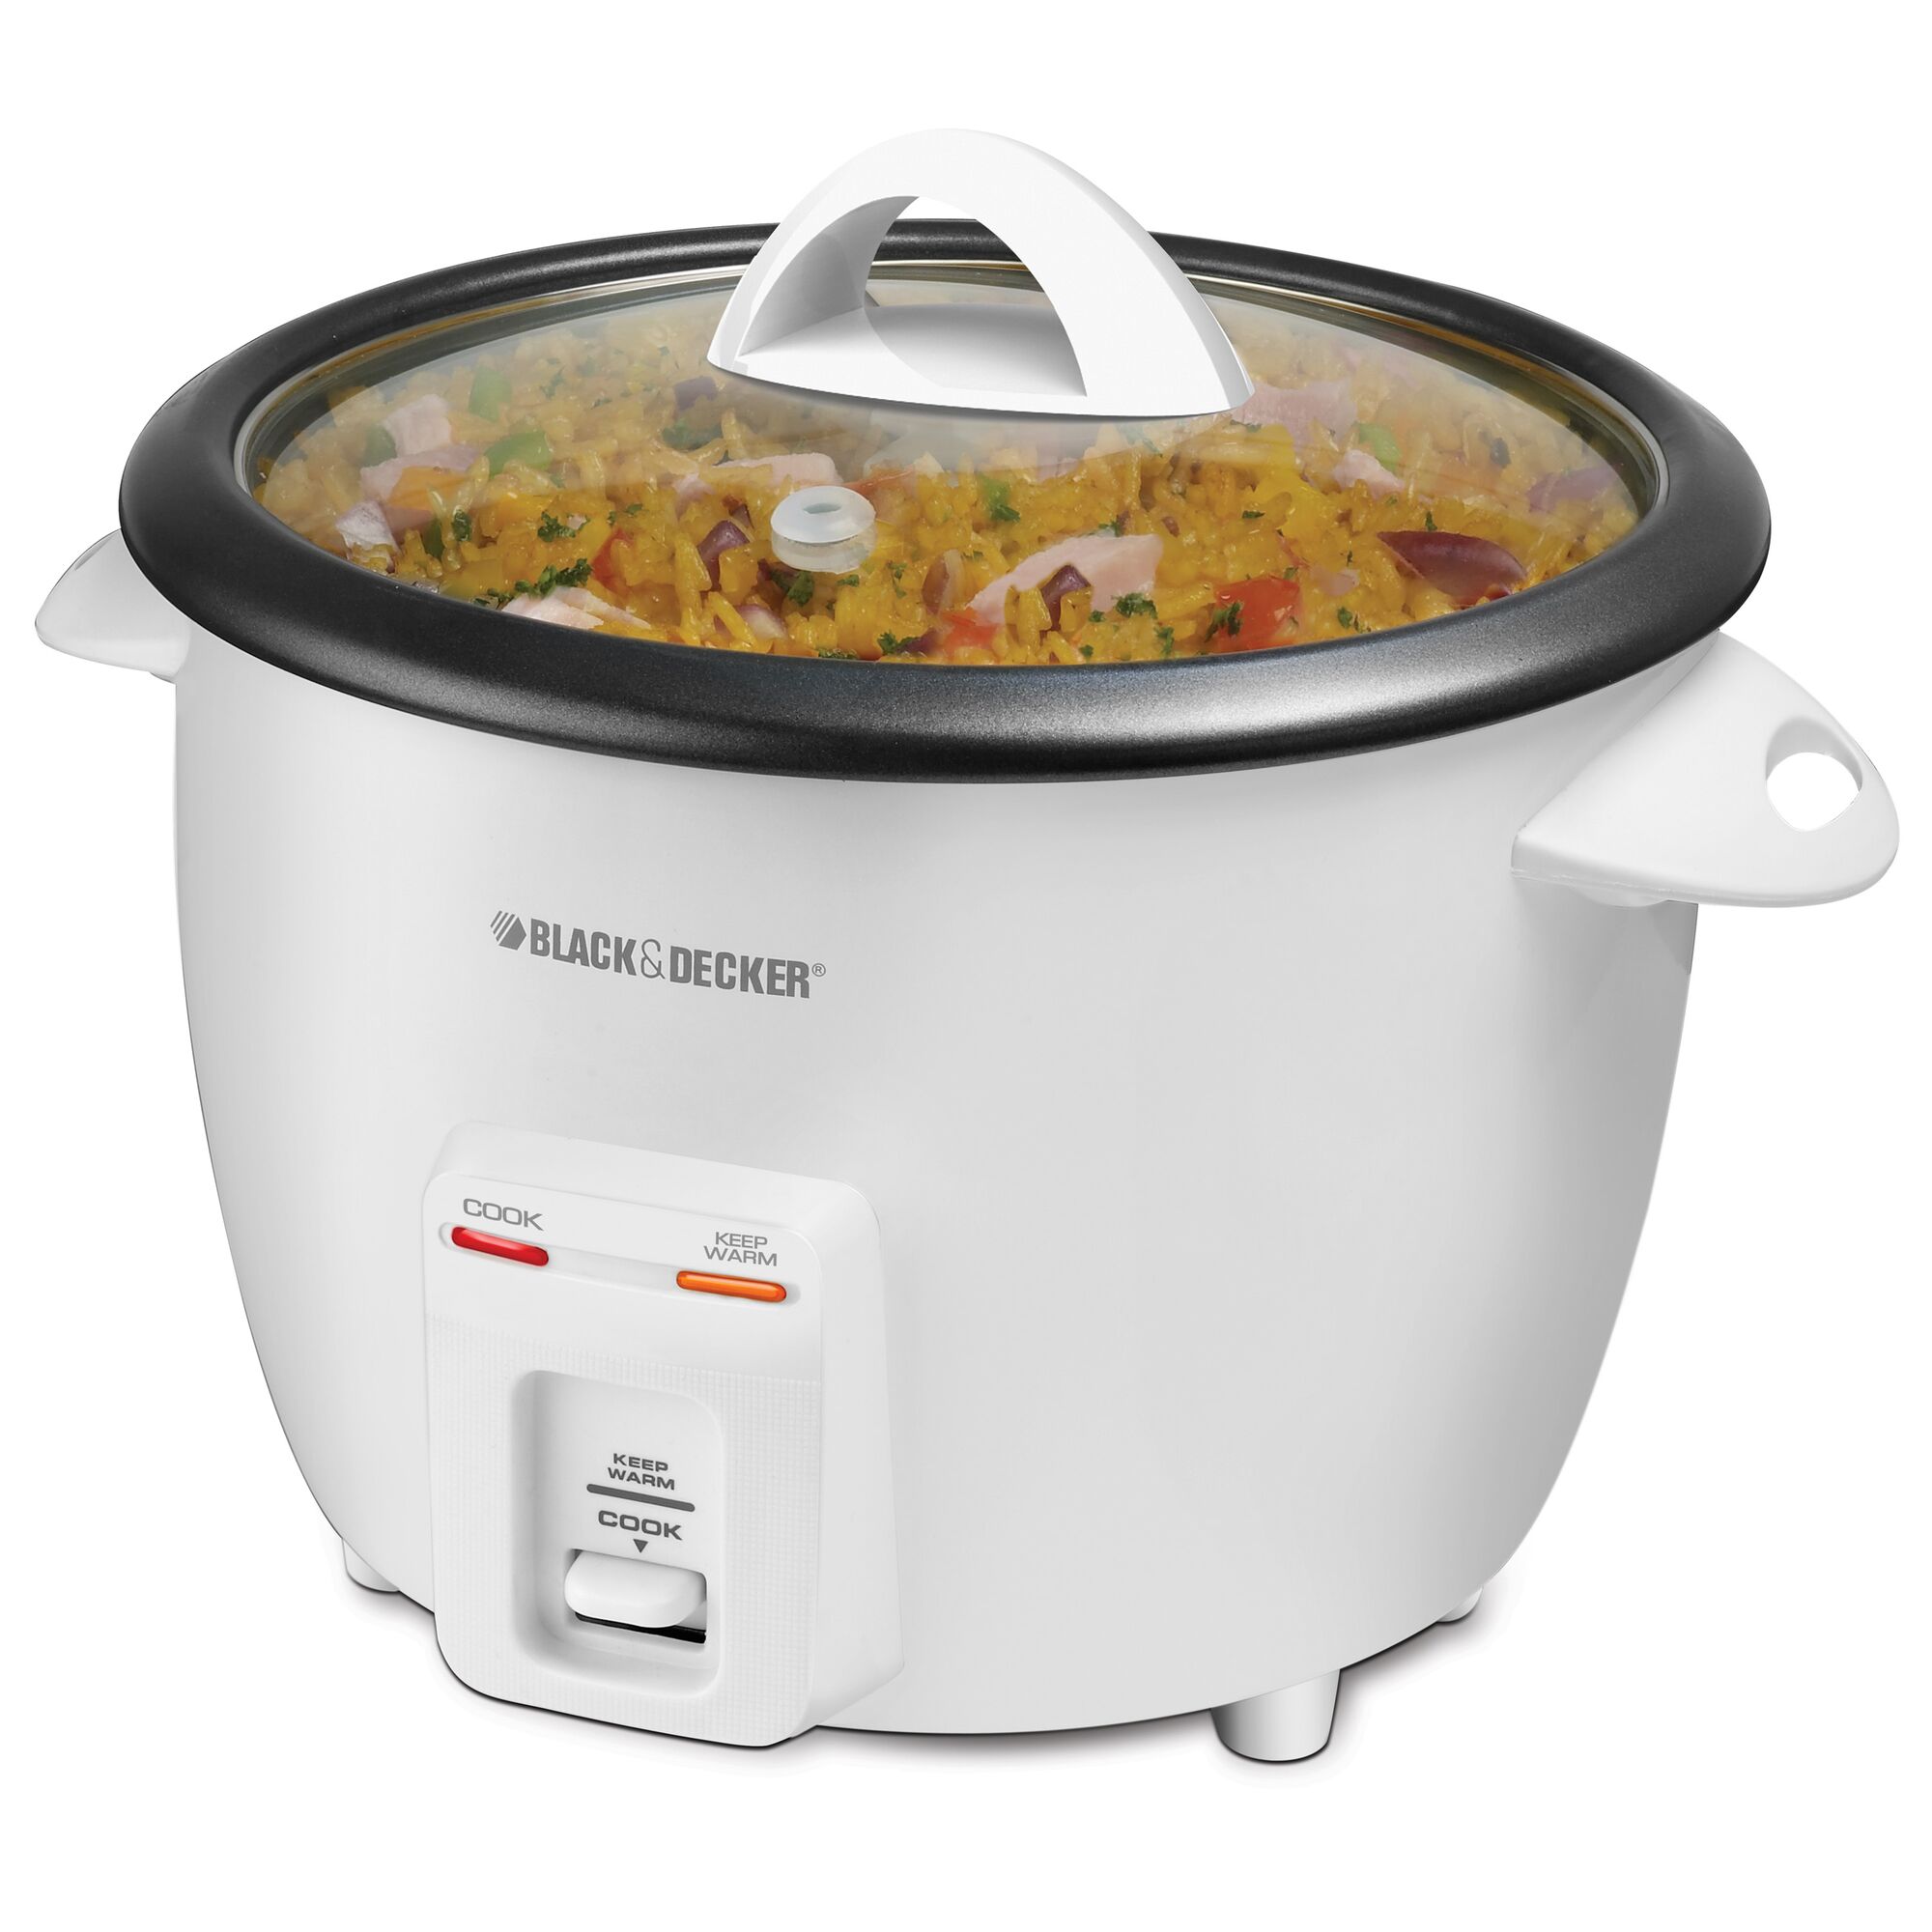 Yellow rice cooking inside the BLACK+DECKER 14 cup rice cooker